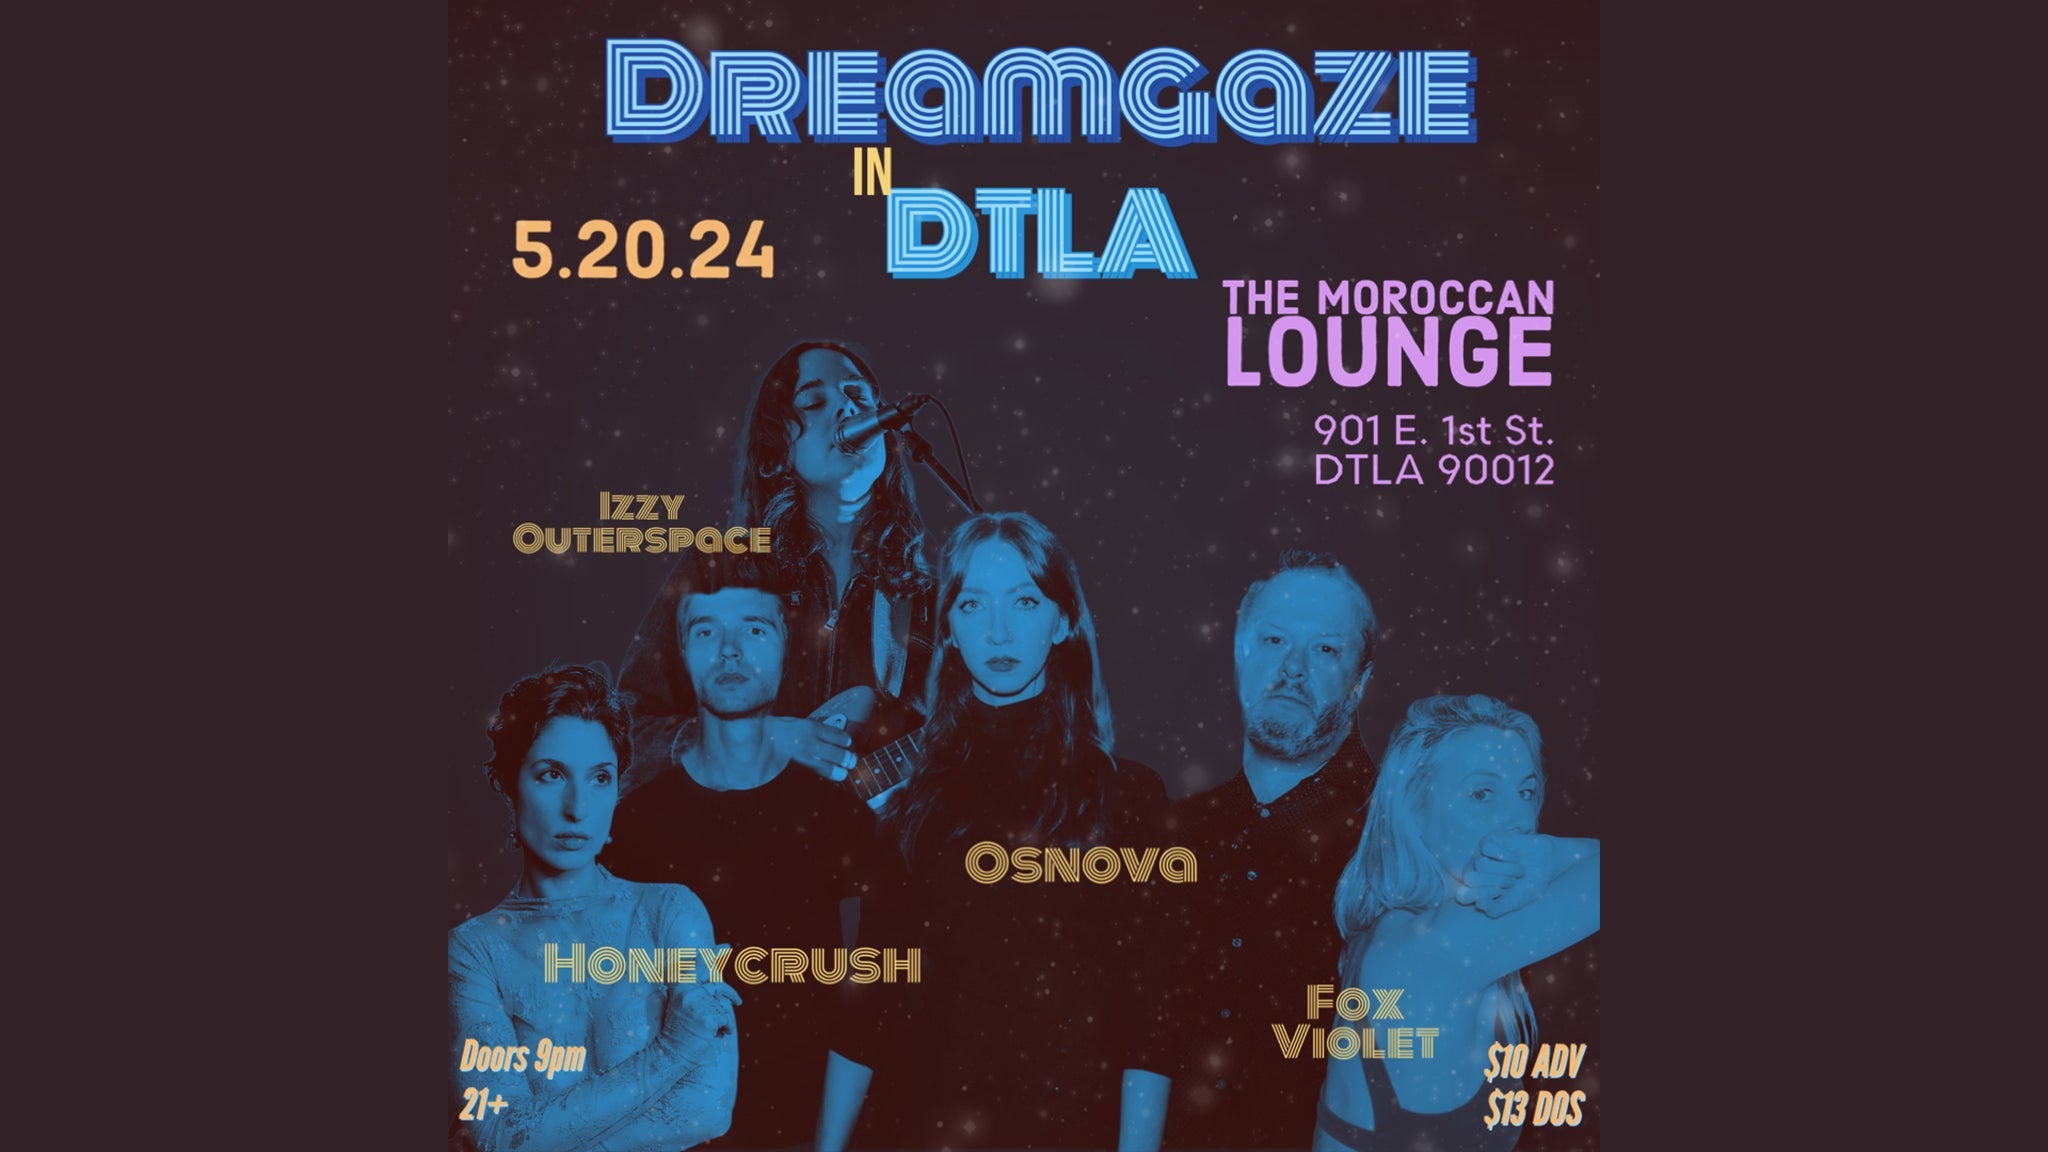 Dreamgaze in DTLA at The Moroccan Lounge